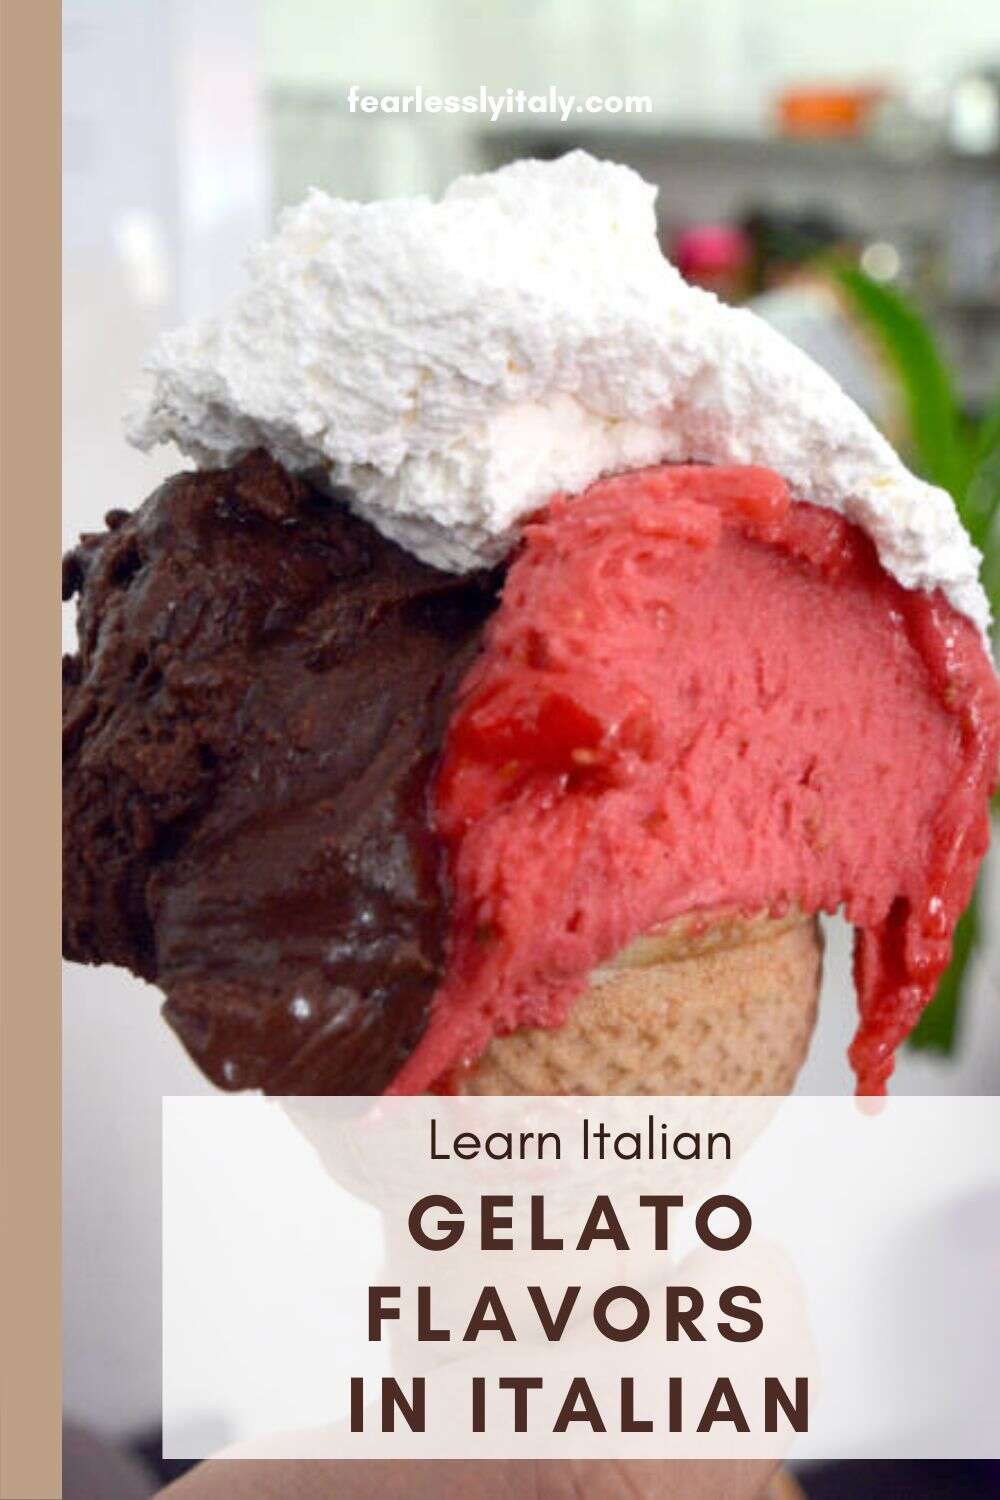 Pinterest image with a photo of gelato in Italy and a caption reading "Learn Italian. Gelato flavors in Italian".